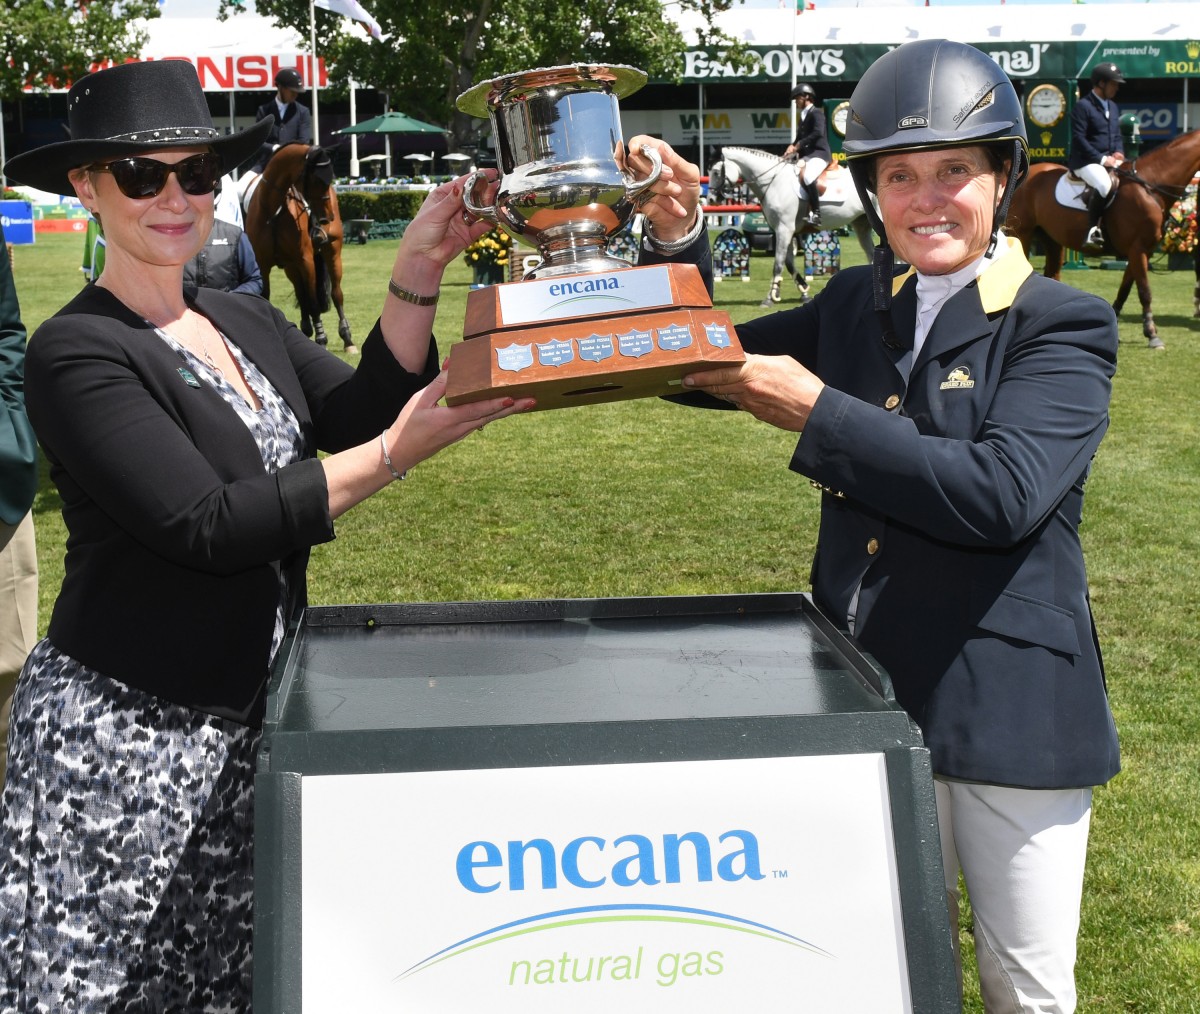 Leslie Howard and Donna Speciale Take Home the Encana Cup